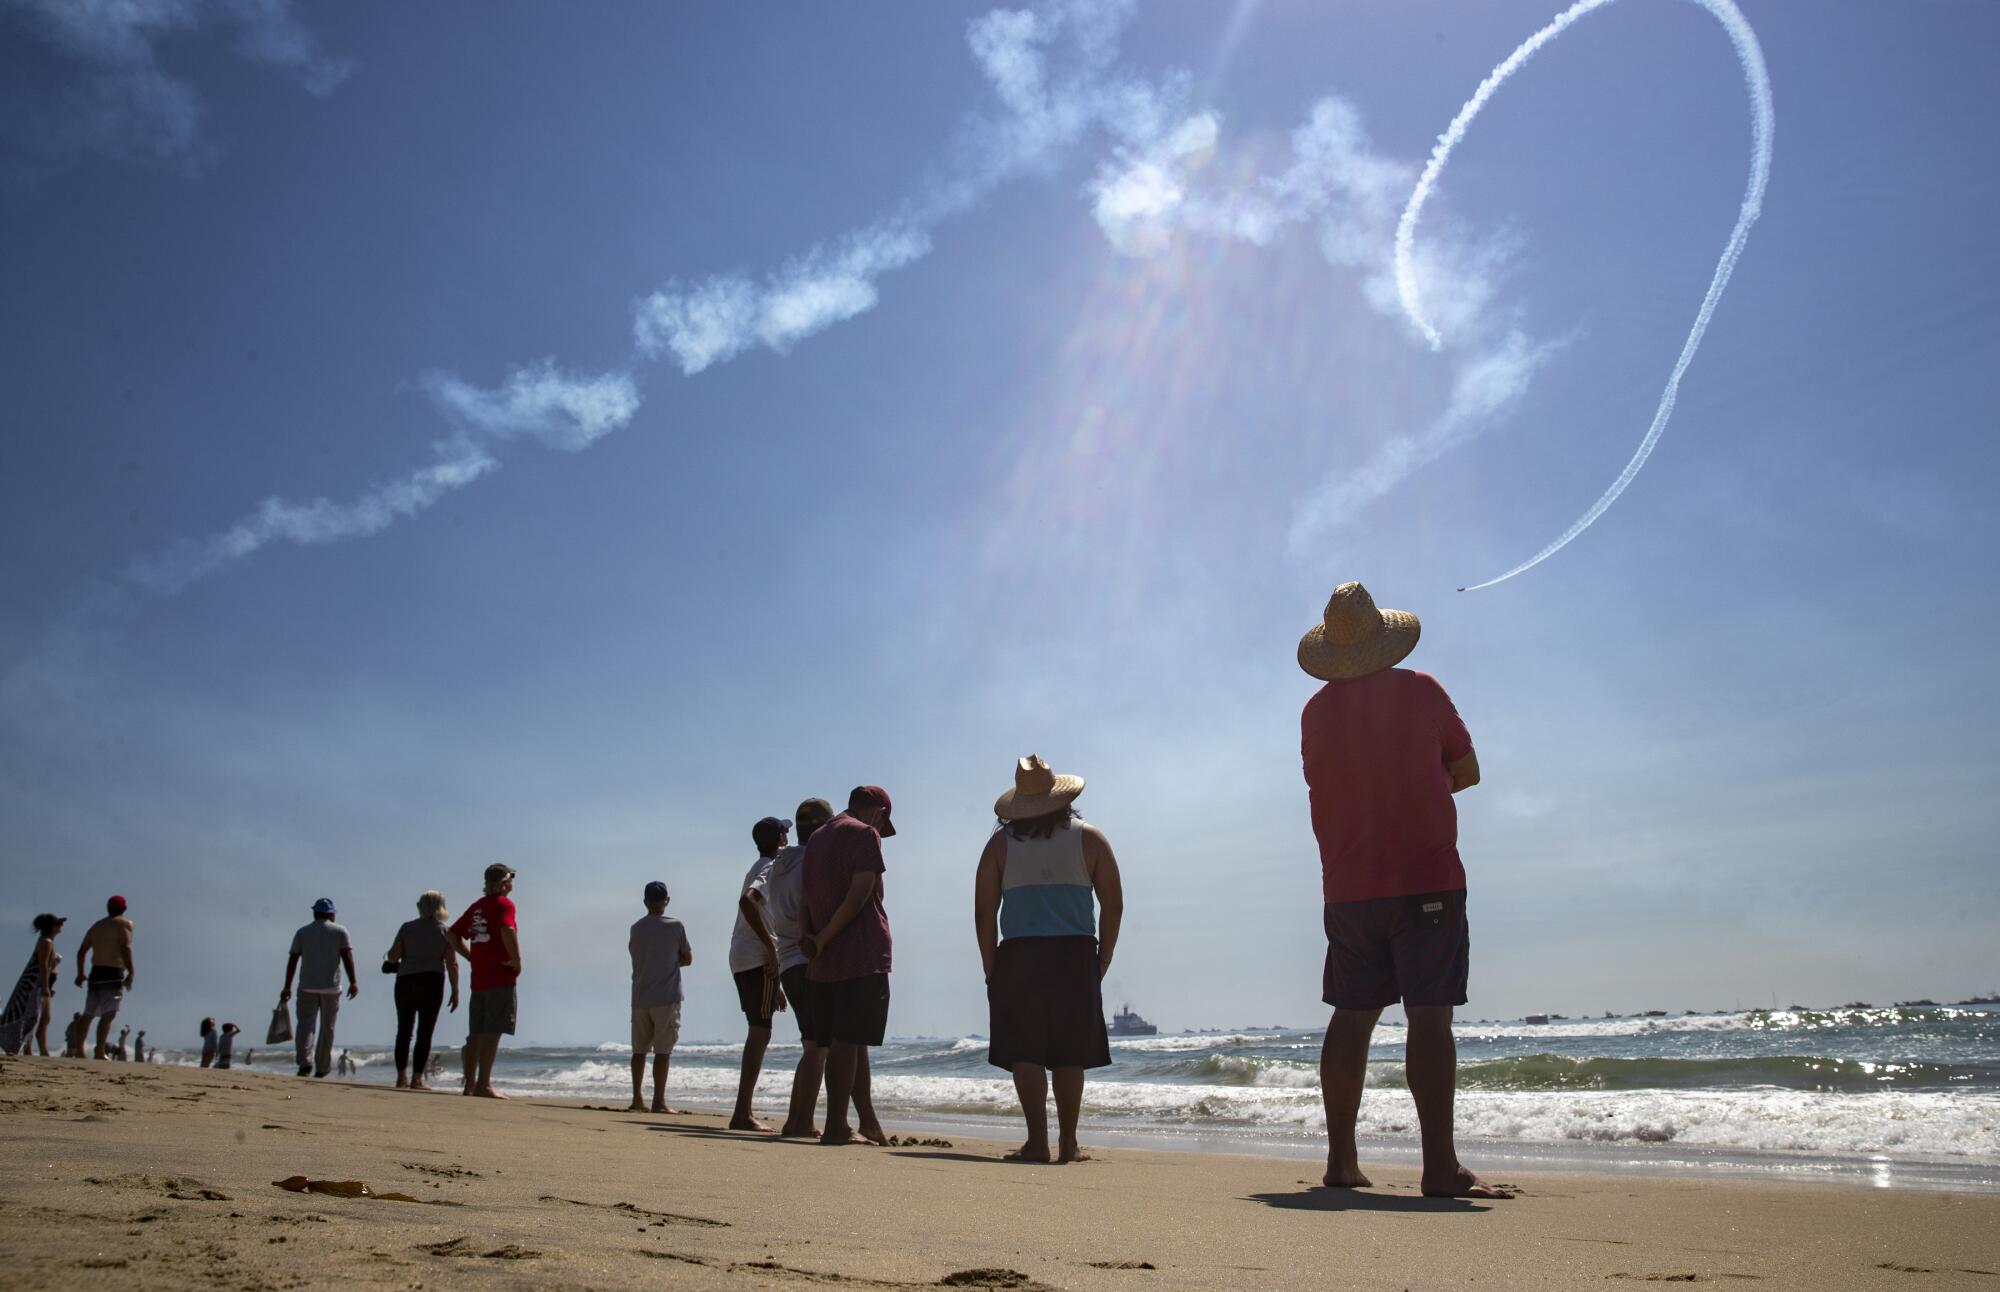 Spectators on the beach watch as a stunt plane pilot performs 